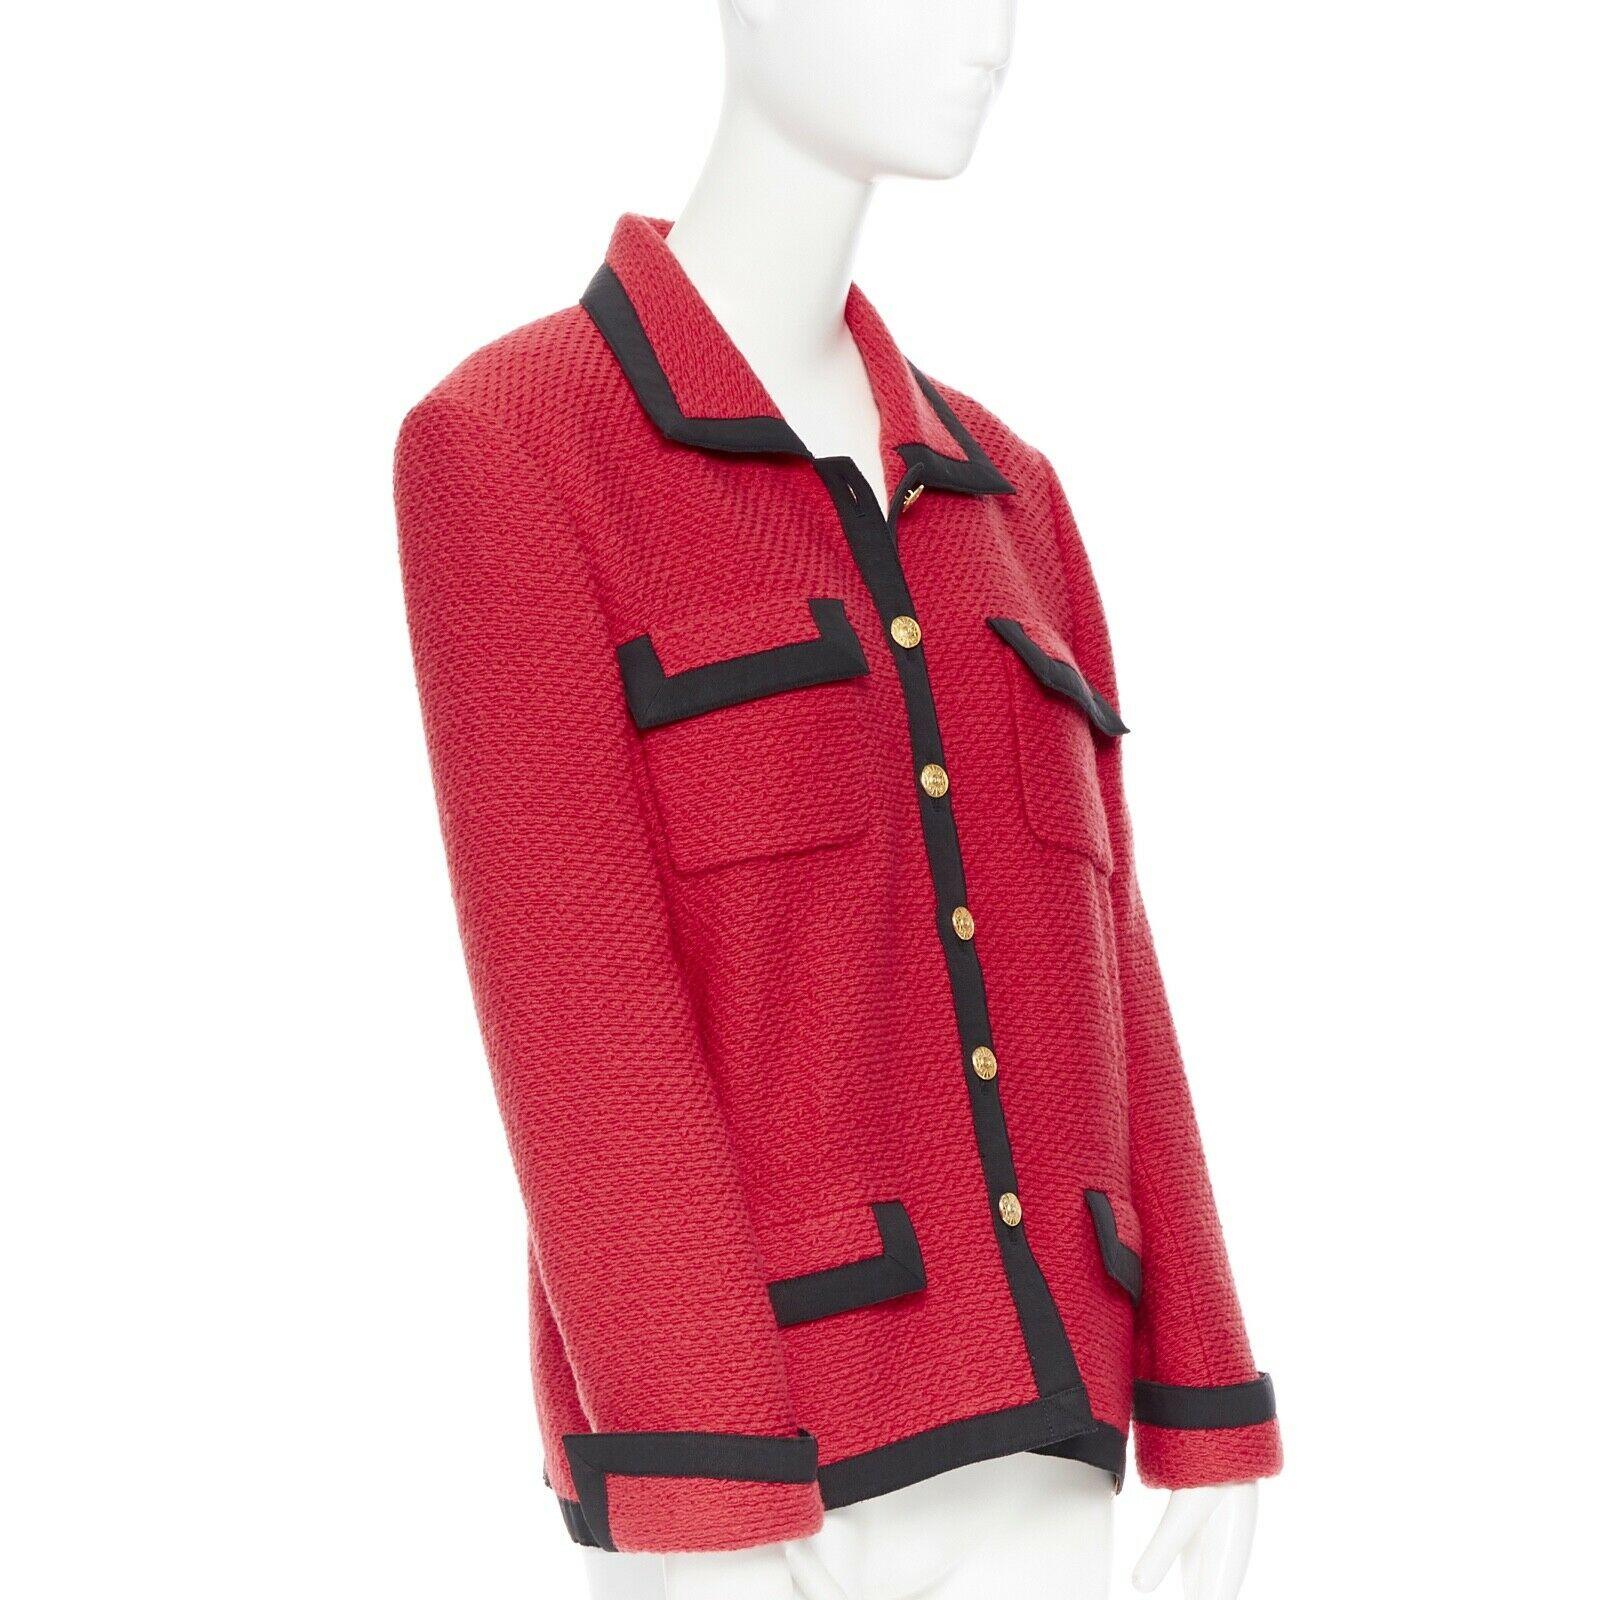 CHANEL 89A vintage red tweed boucle 4 pockets black trim button-up jacket FR42
Brand: CHANEL
Designer: Karl Lagerfeld
Collection: 89A
Model Name / Style: Tweed jacket
Material: Other; composition label removed. Feels like wool.
Color: Red; Vermilion